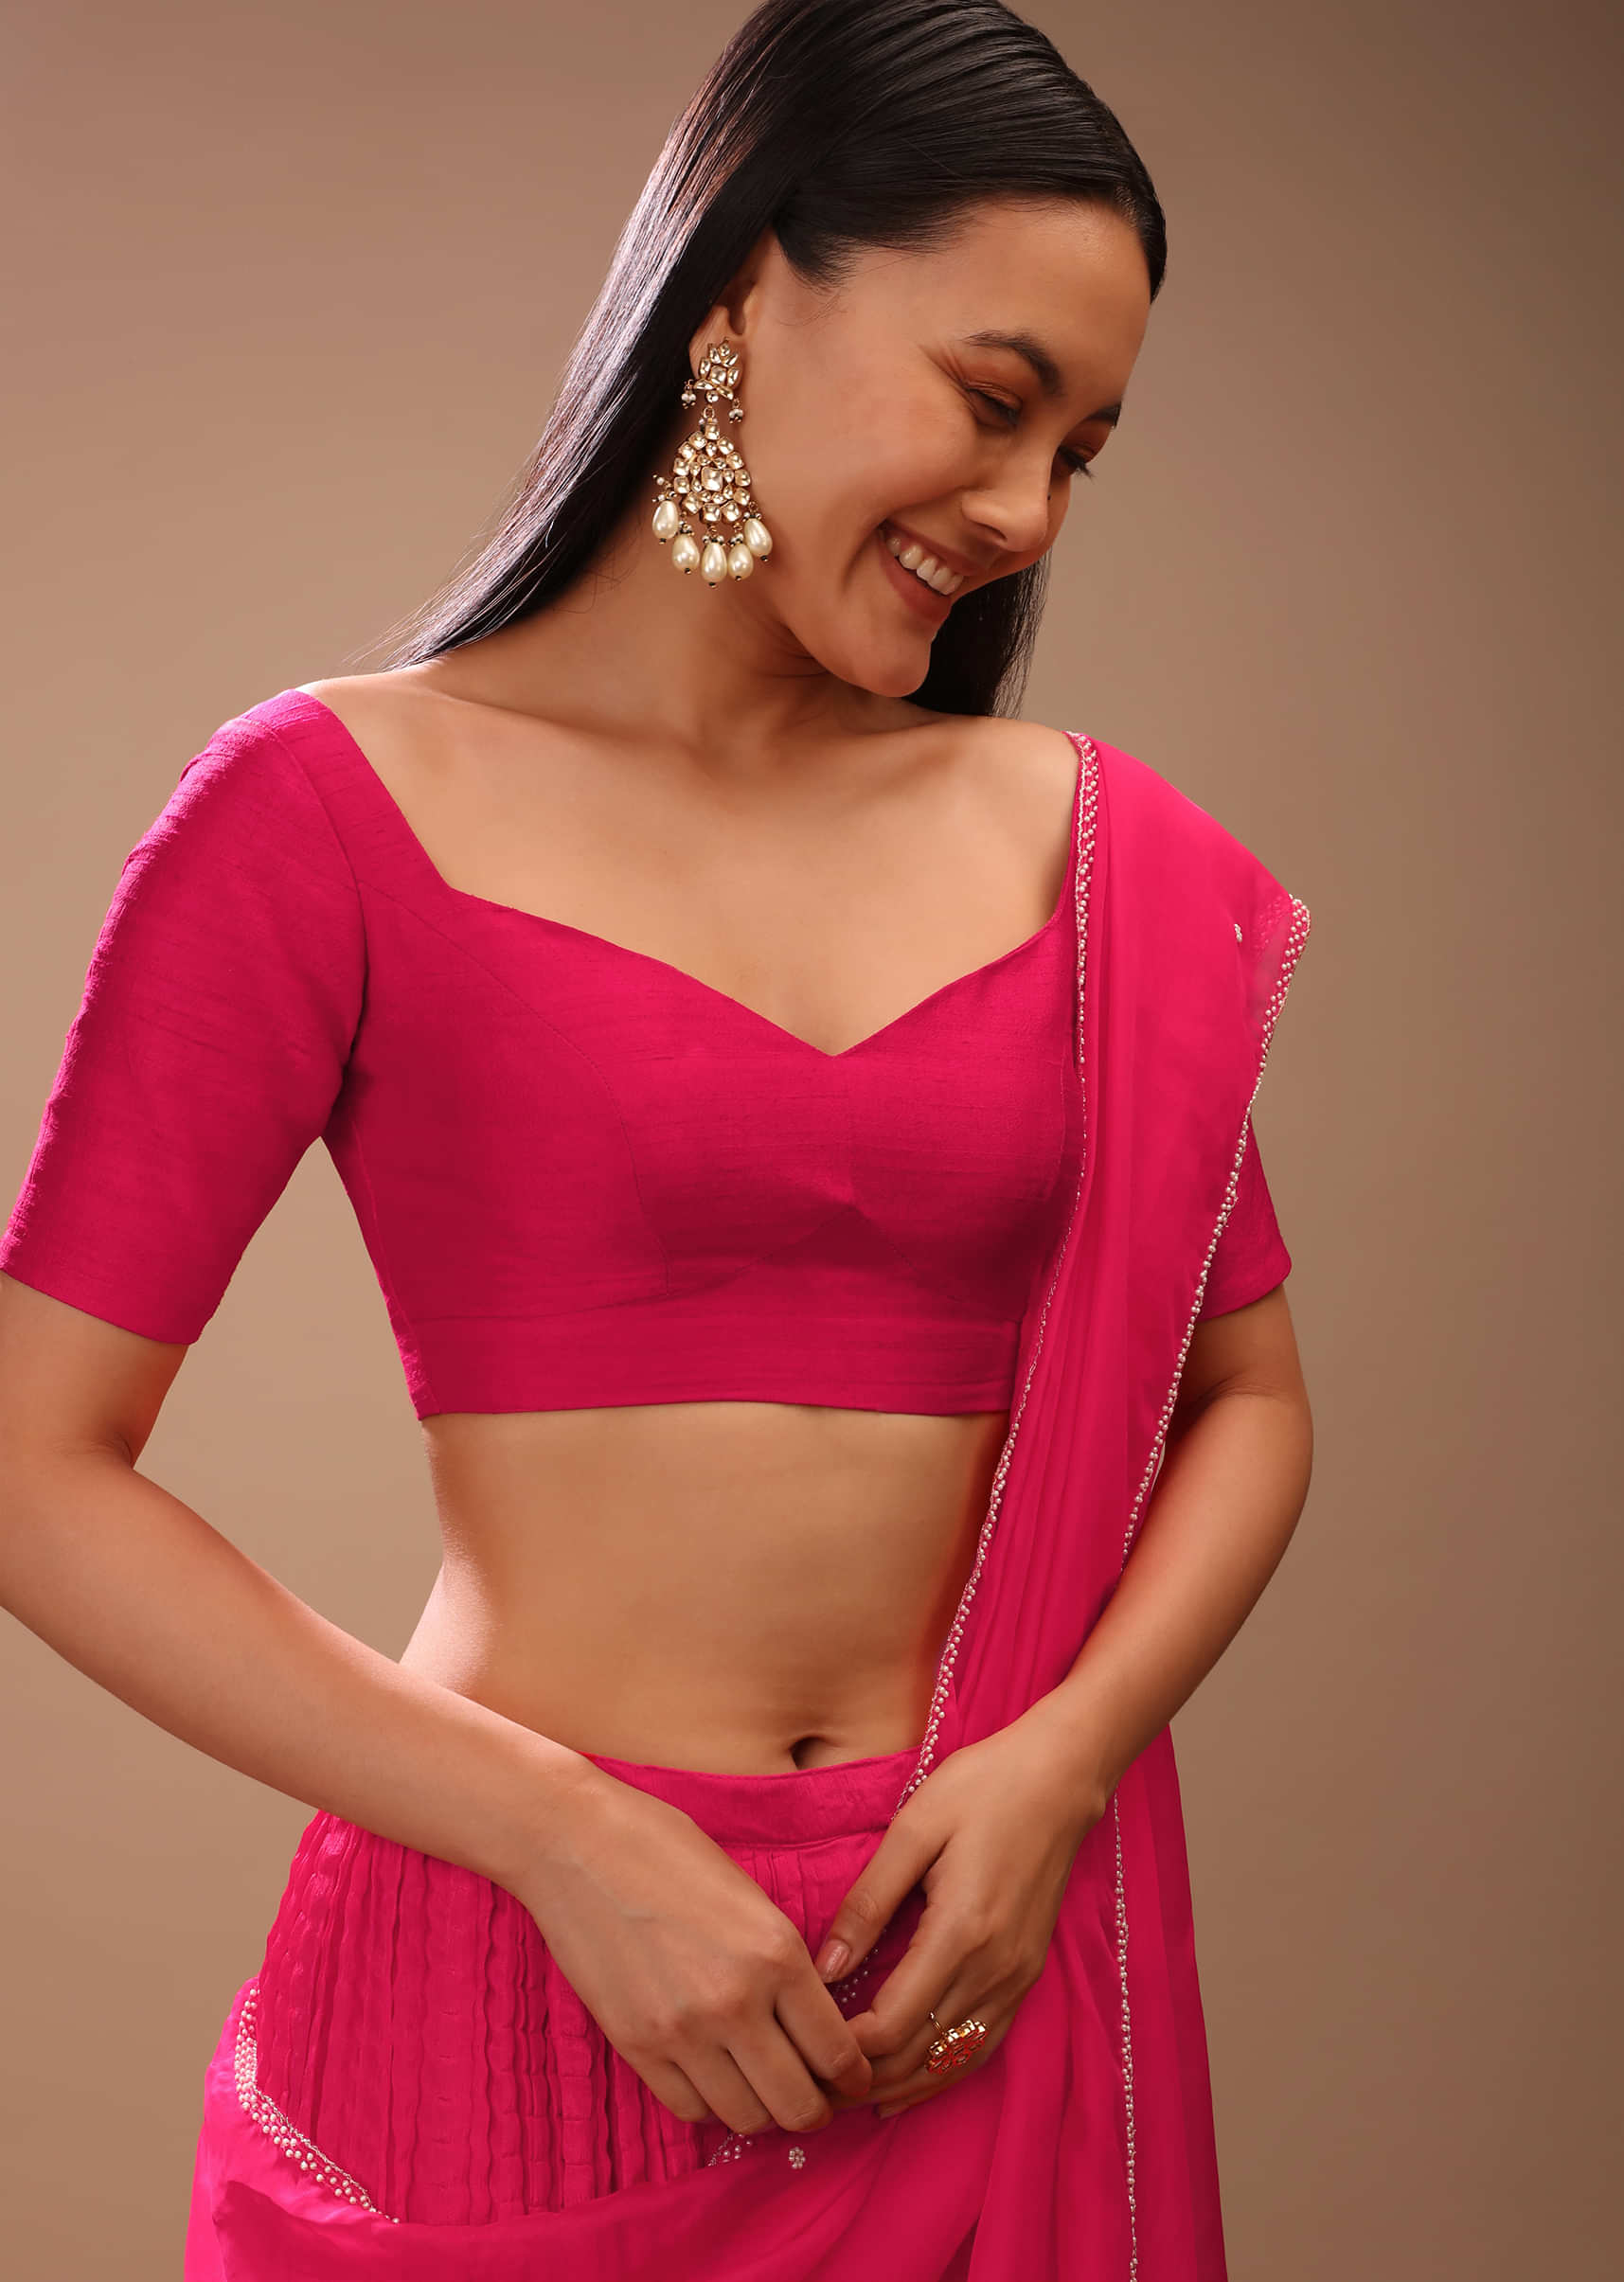 Silk saree blouse designs models women – Trending Blouse Designs Pattern  For Every Indian Woman – Blouses Discover the Latest Best Selling Shop  women's shirts high-quality blouses